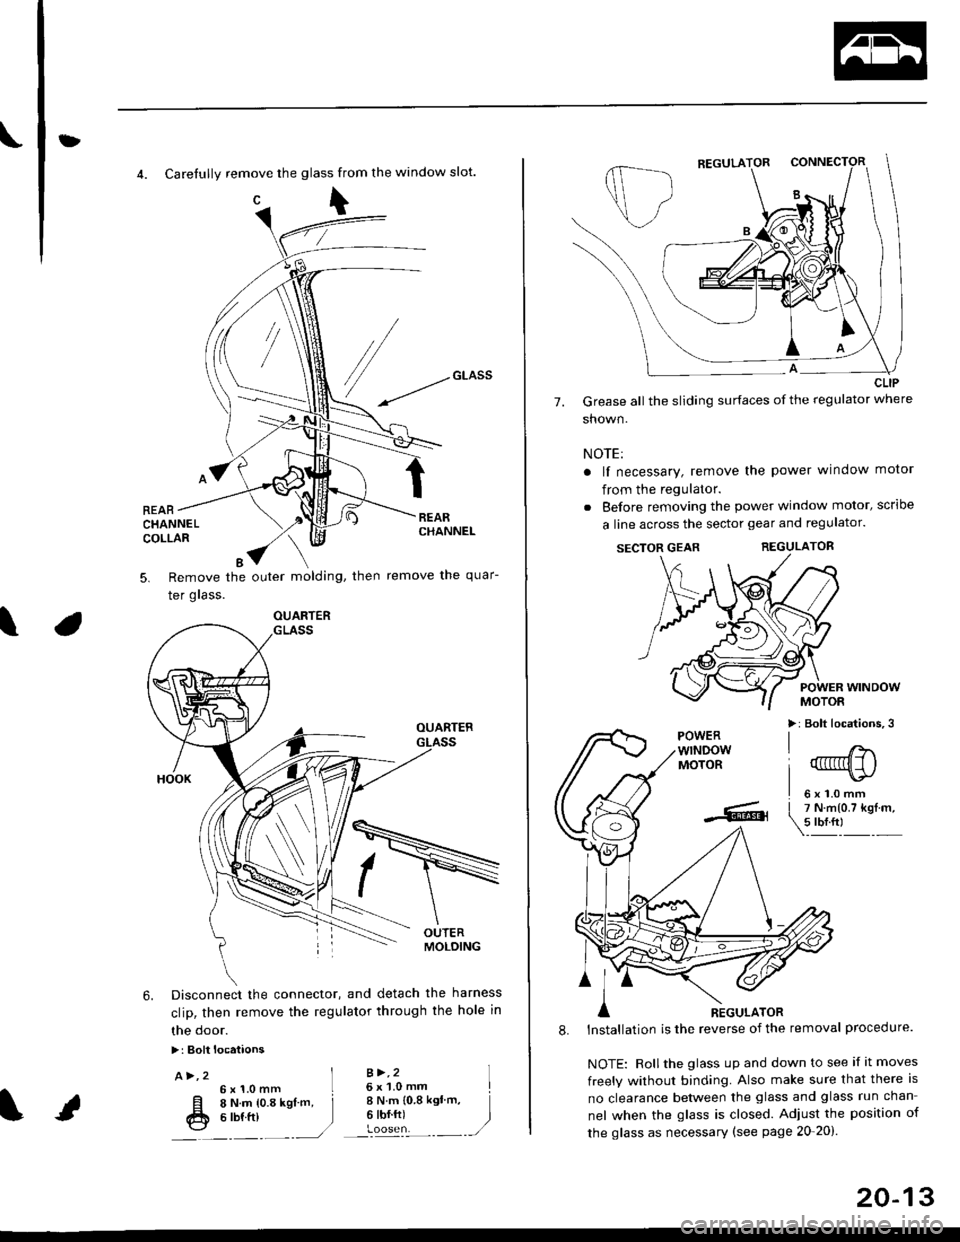 HONDA CIVIC 1998 6.G Workshop Manual t}
4. Carefully remove the glass from the window slot.
c\
REARCHANNELCOLLAR
Remove the outer molding, then
Ier grass.
remove the quar-5.
\
6. Disconnect the connector, and detach the harness
clip, the